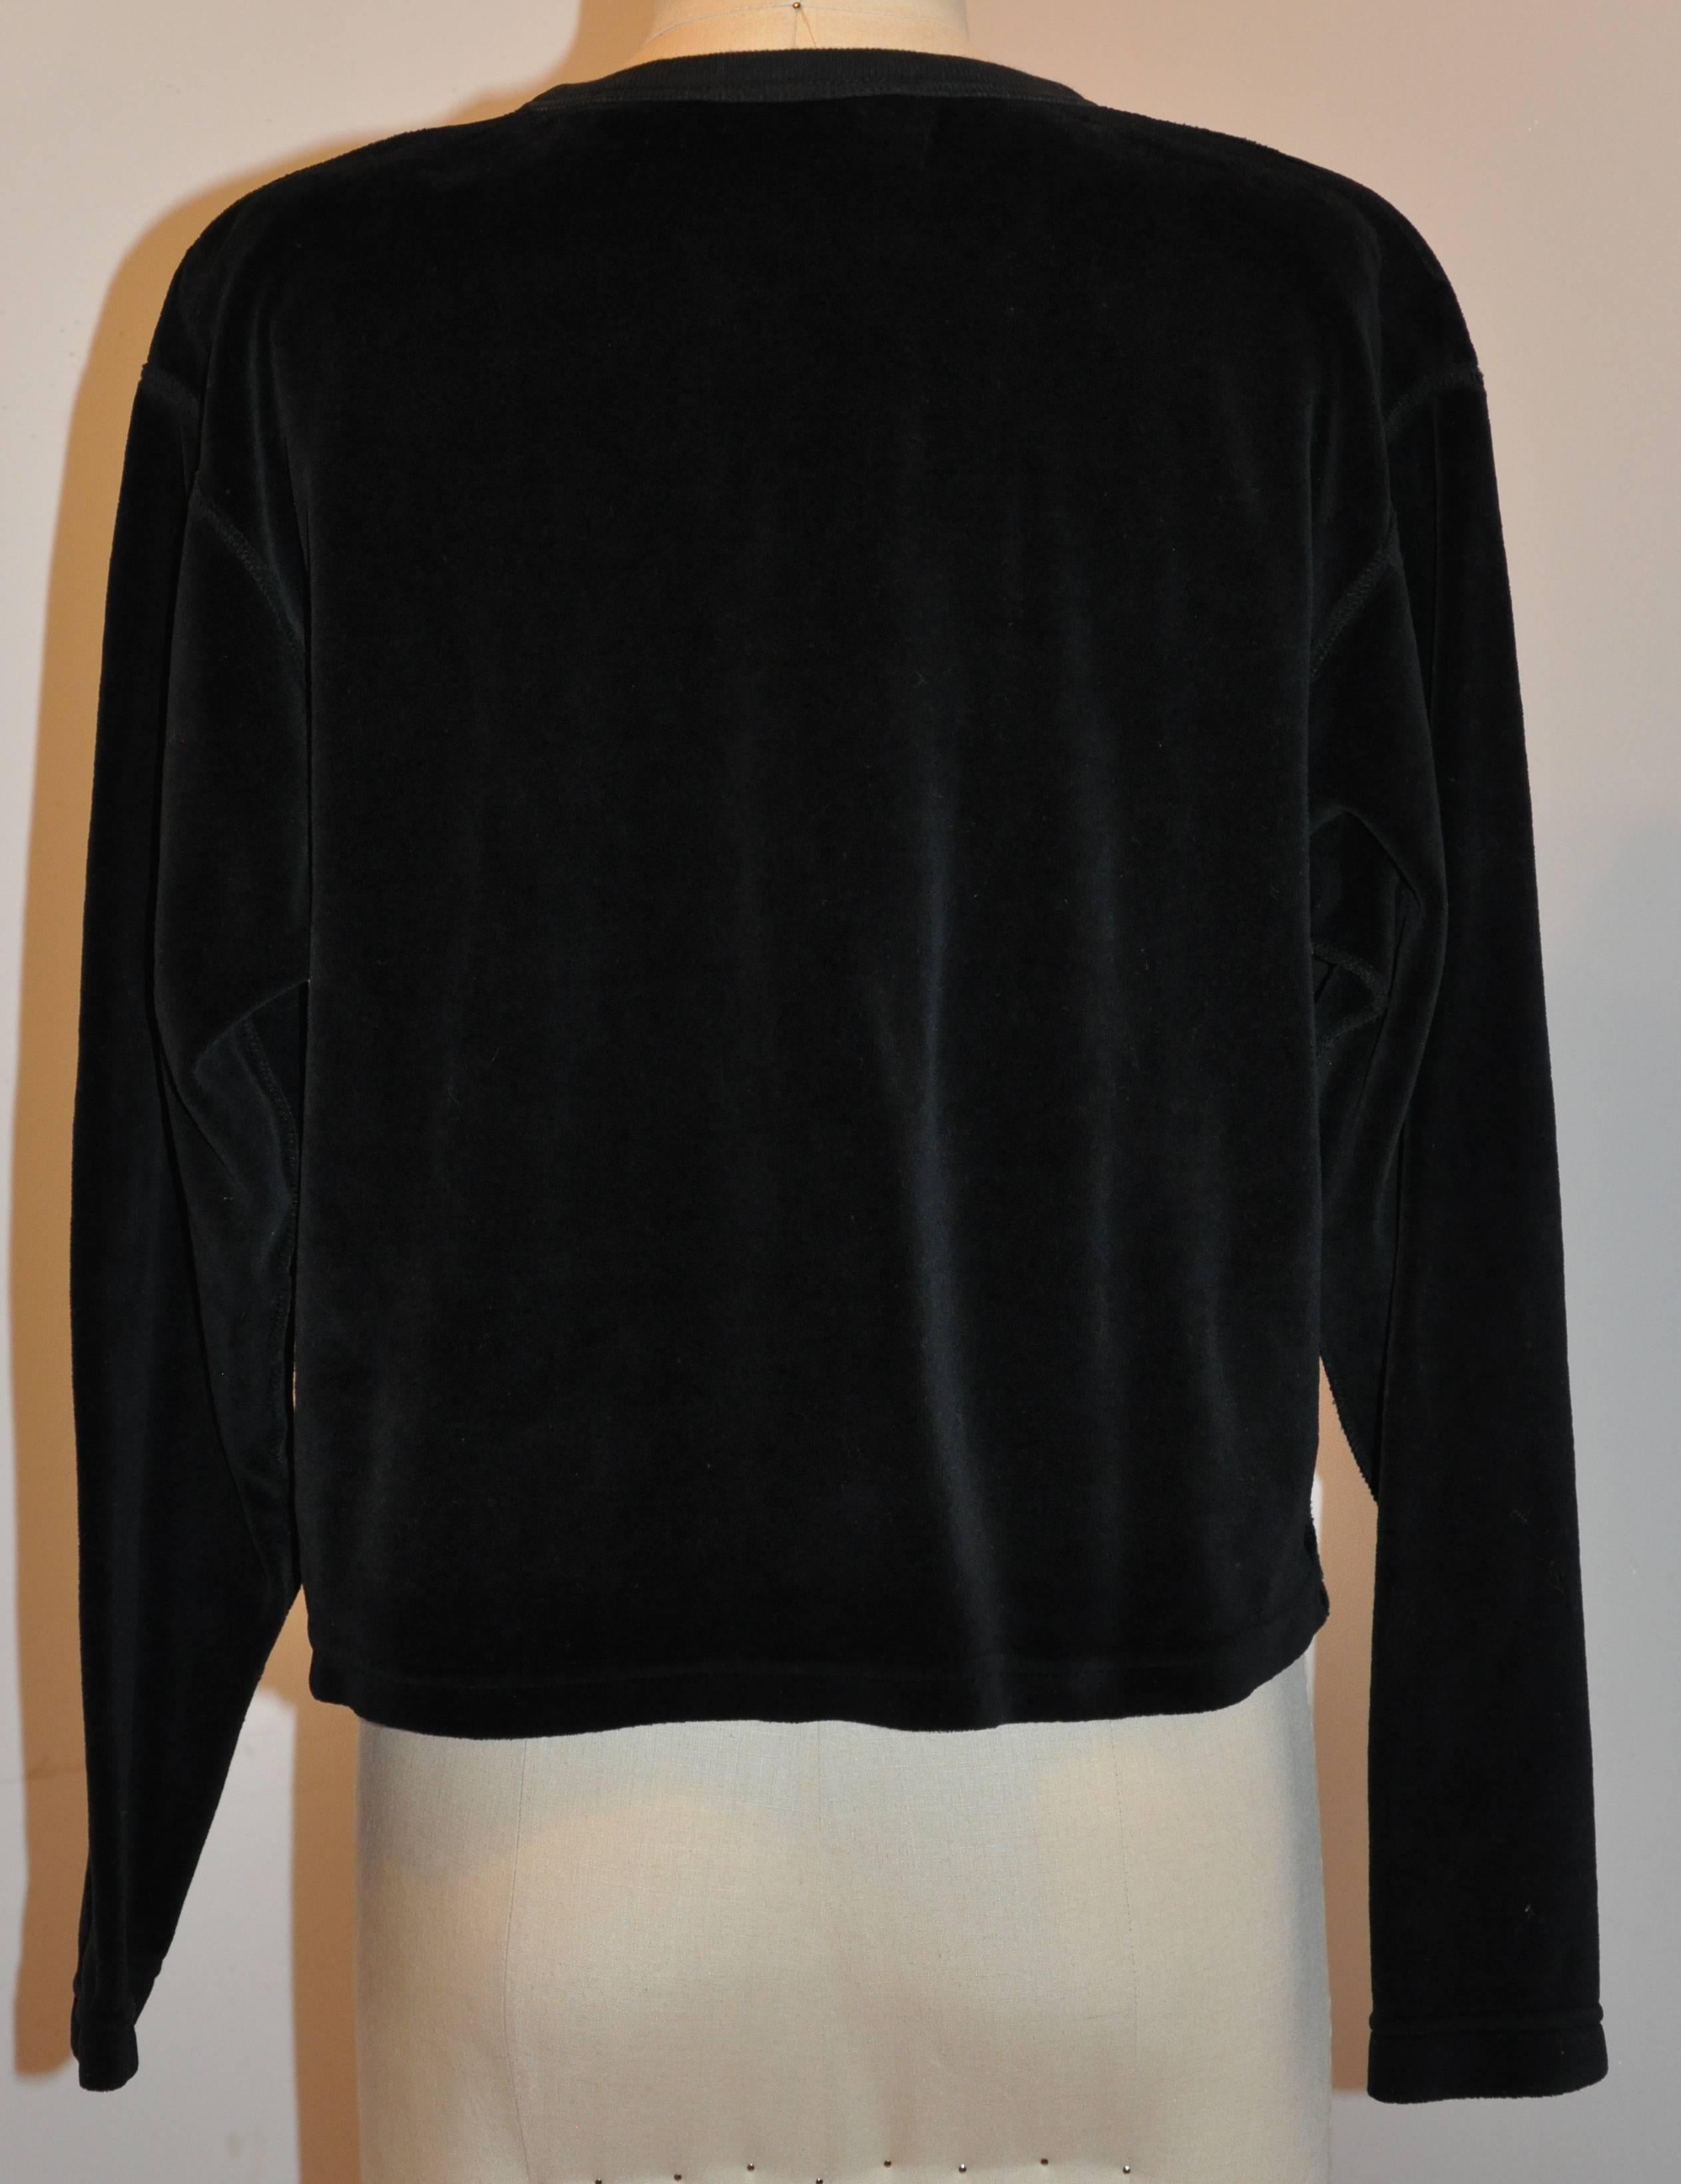        Sonia Rykiel black cotton cropped pullover top is accented with two set-in front pockets. The dropped shoulder helps give a relax fit. The shoulder measures 19